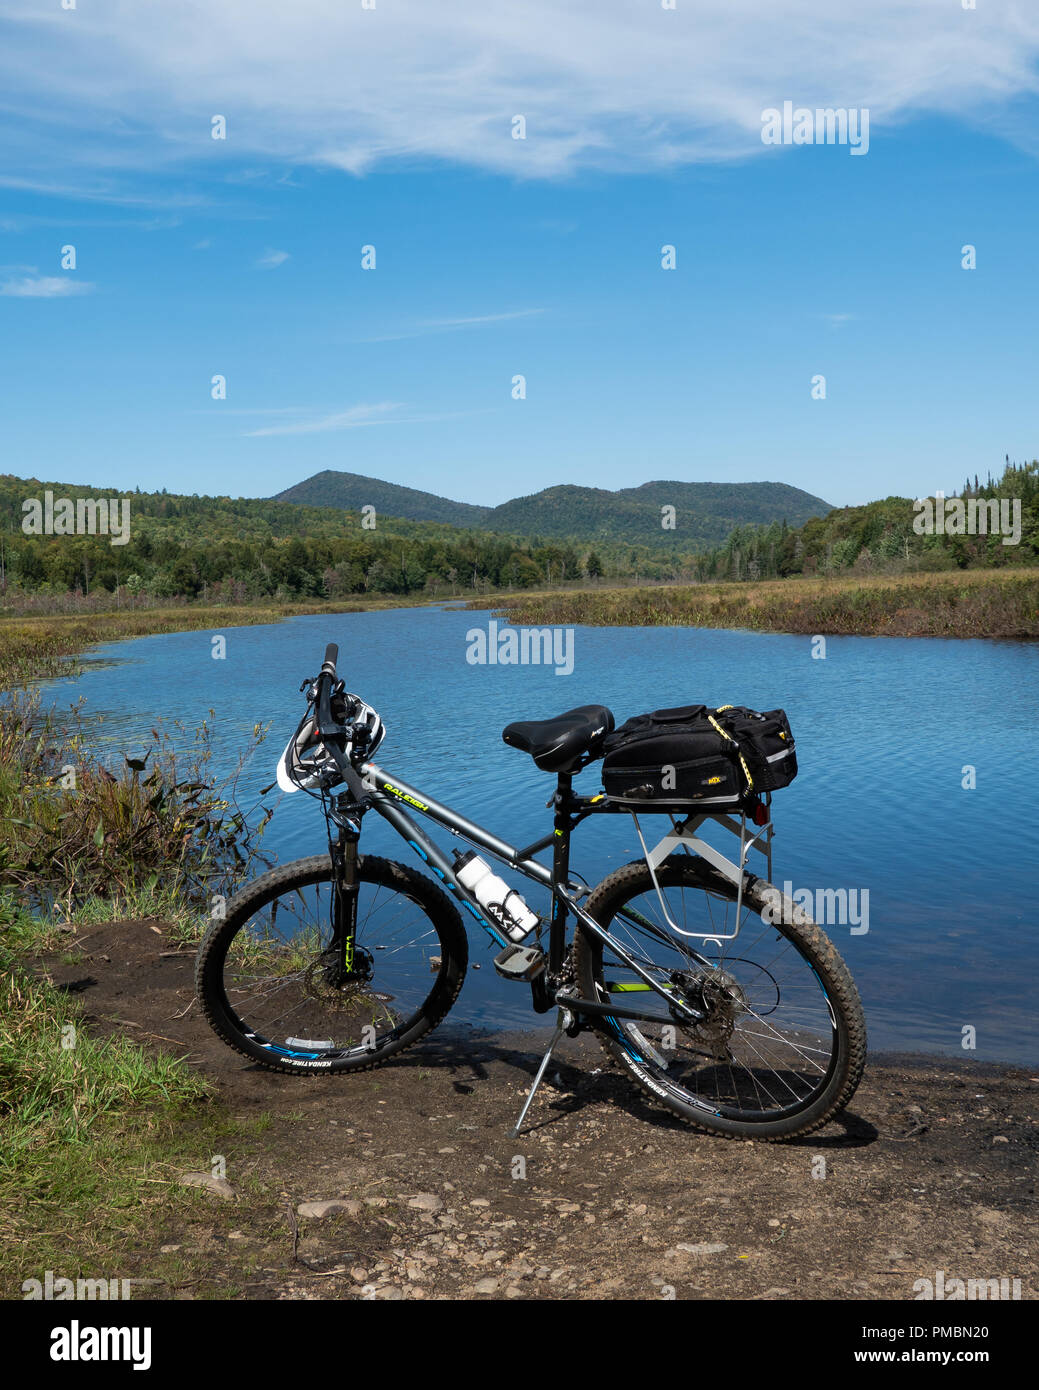 A gray Raleigh mountain bicycle parked on the shore of the Kunjamuk River in the Adirondack Mountains, NY, with a view of the river and wilderness. Stock Photo